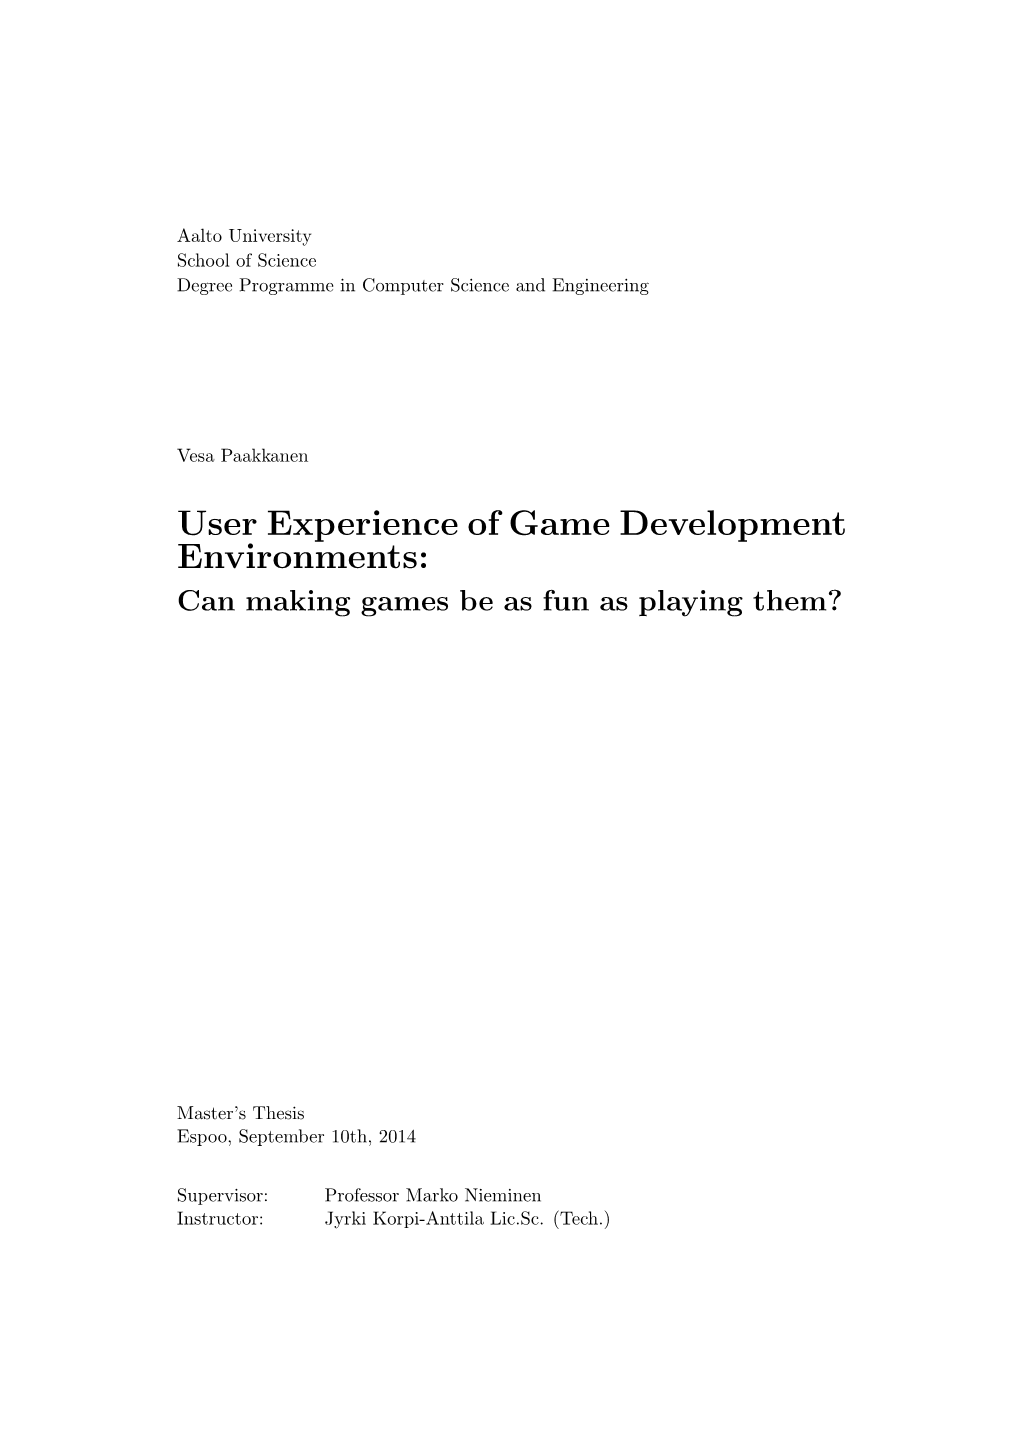 User Experience of Game Development Environments: Can Making Games Be As Fun As Playing Them?